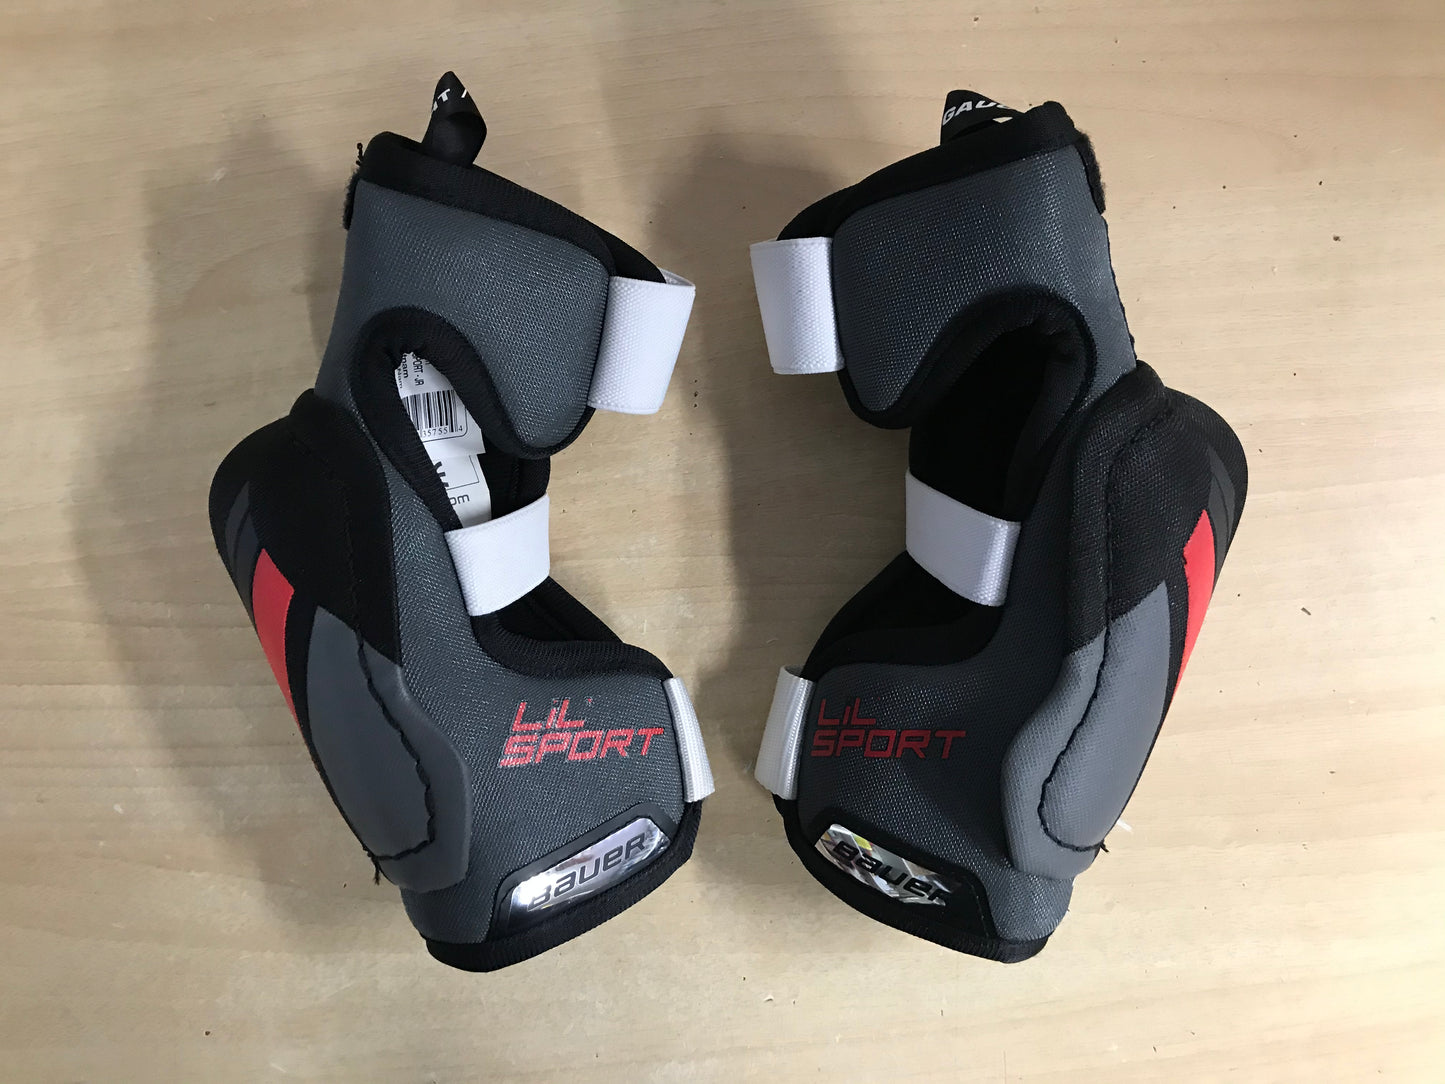 Hockey Elbow Pads Child Size Junior Small 6-8 Bauer Lil Sport New Demo Model